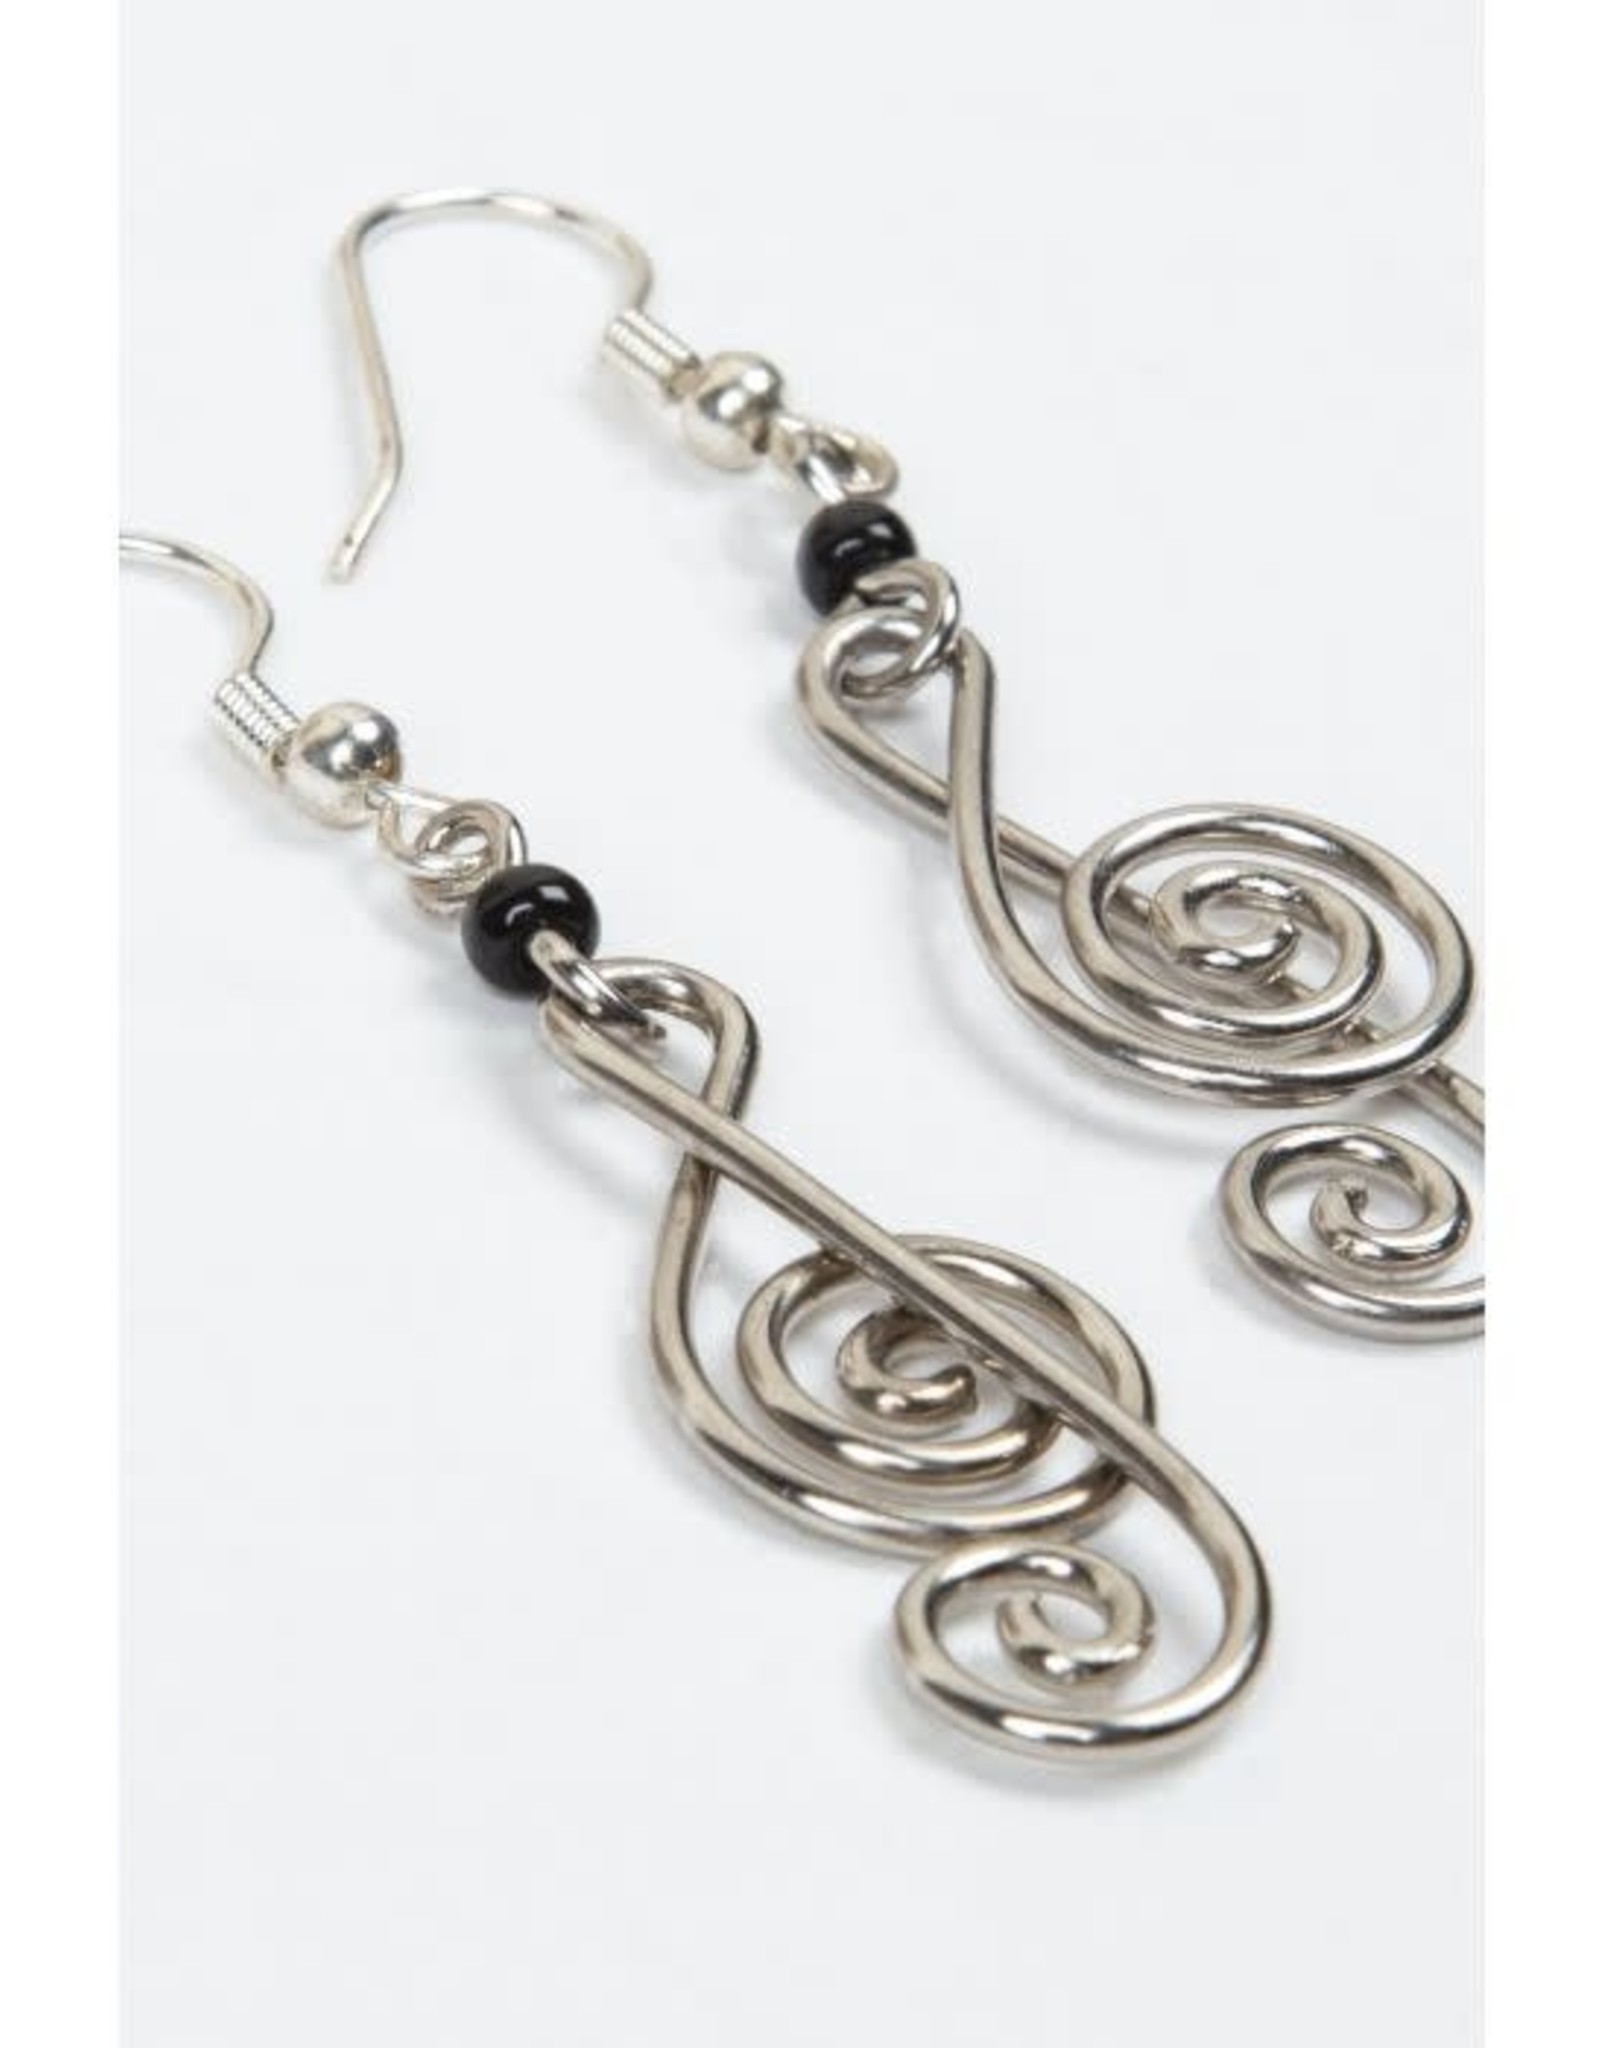 Ten Thousand Villages Music Theory Earrings